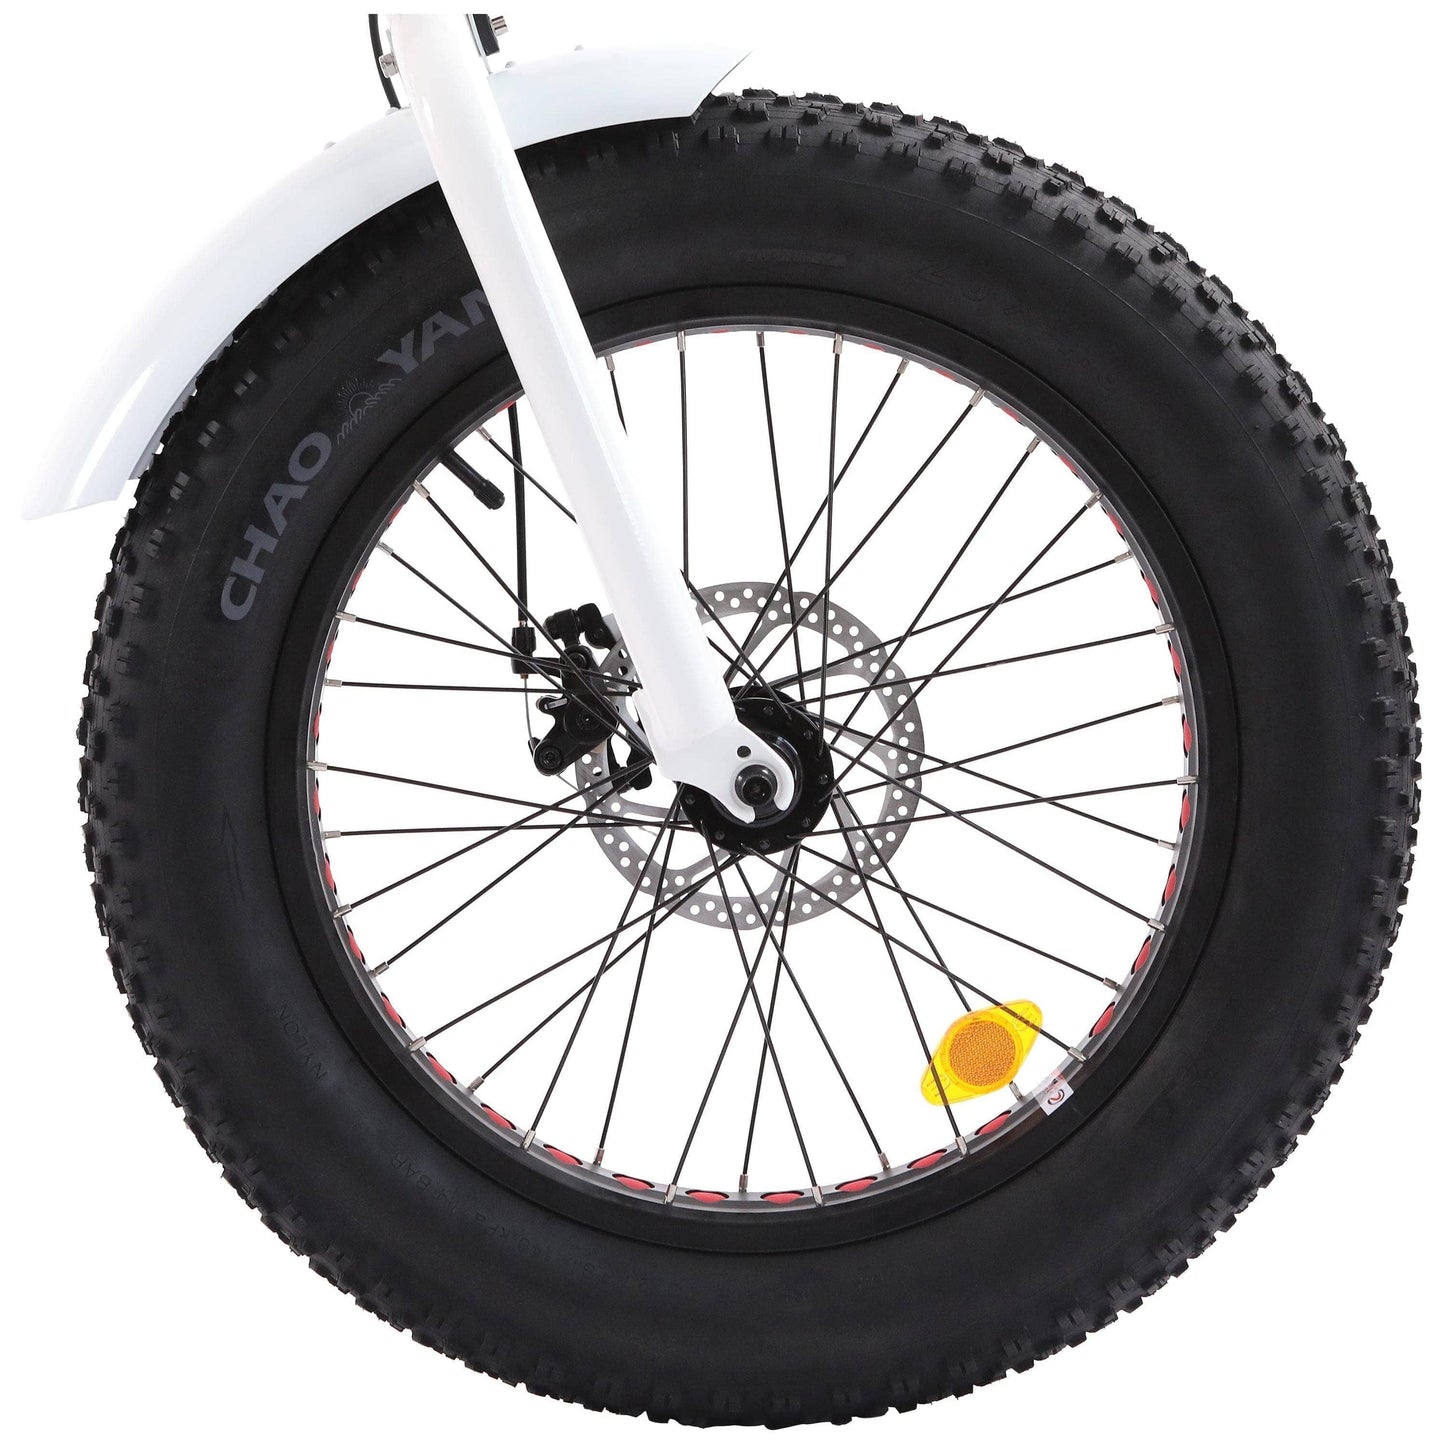 Ecotric ebikes Ecotric 20-inch White Fat Tire Portable and Folding Electric Bike